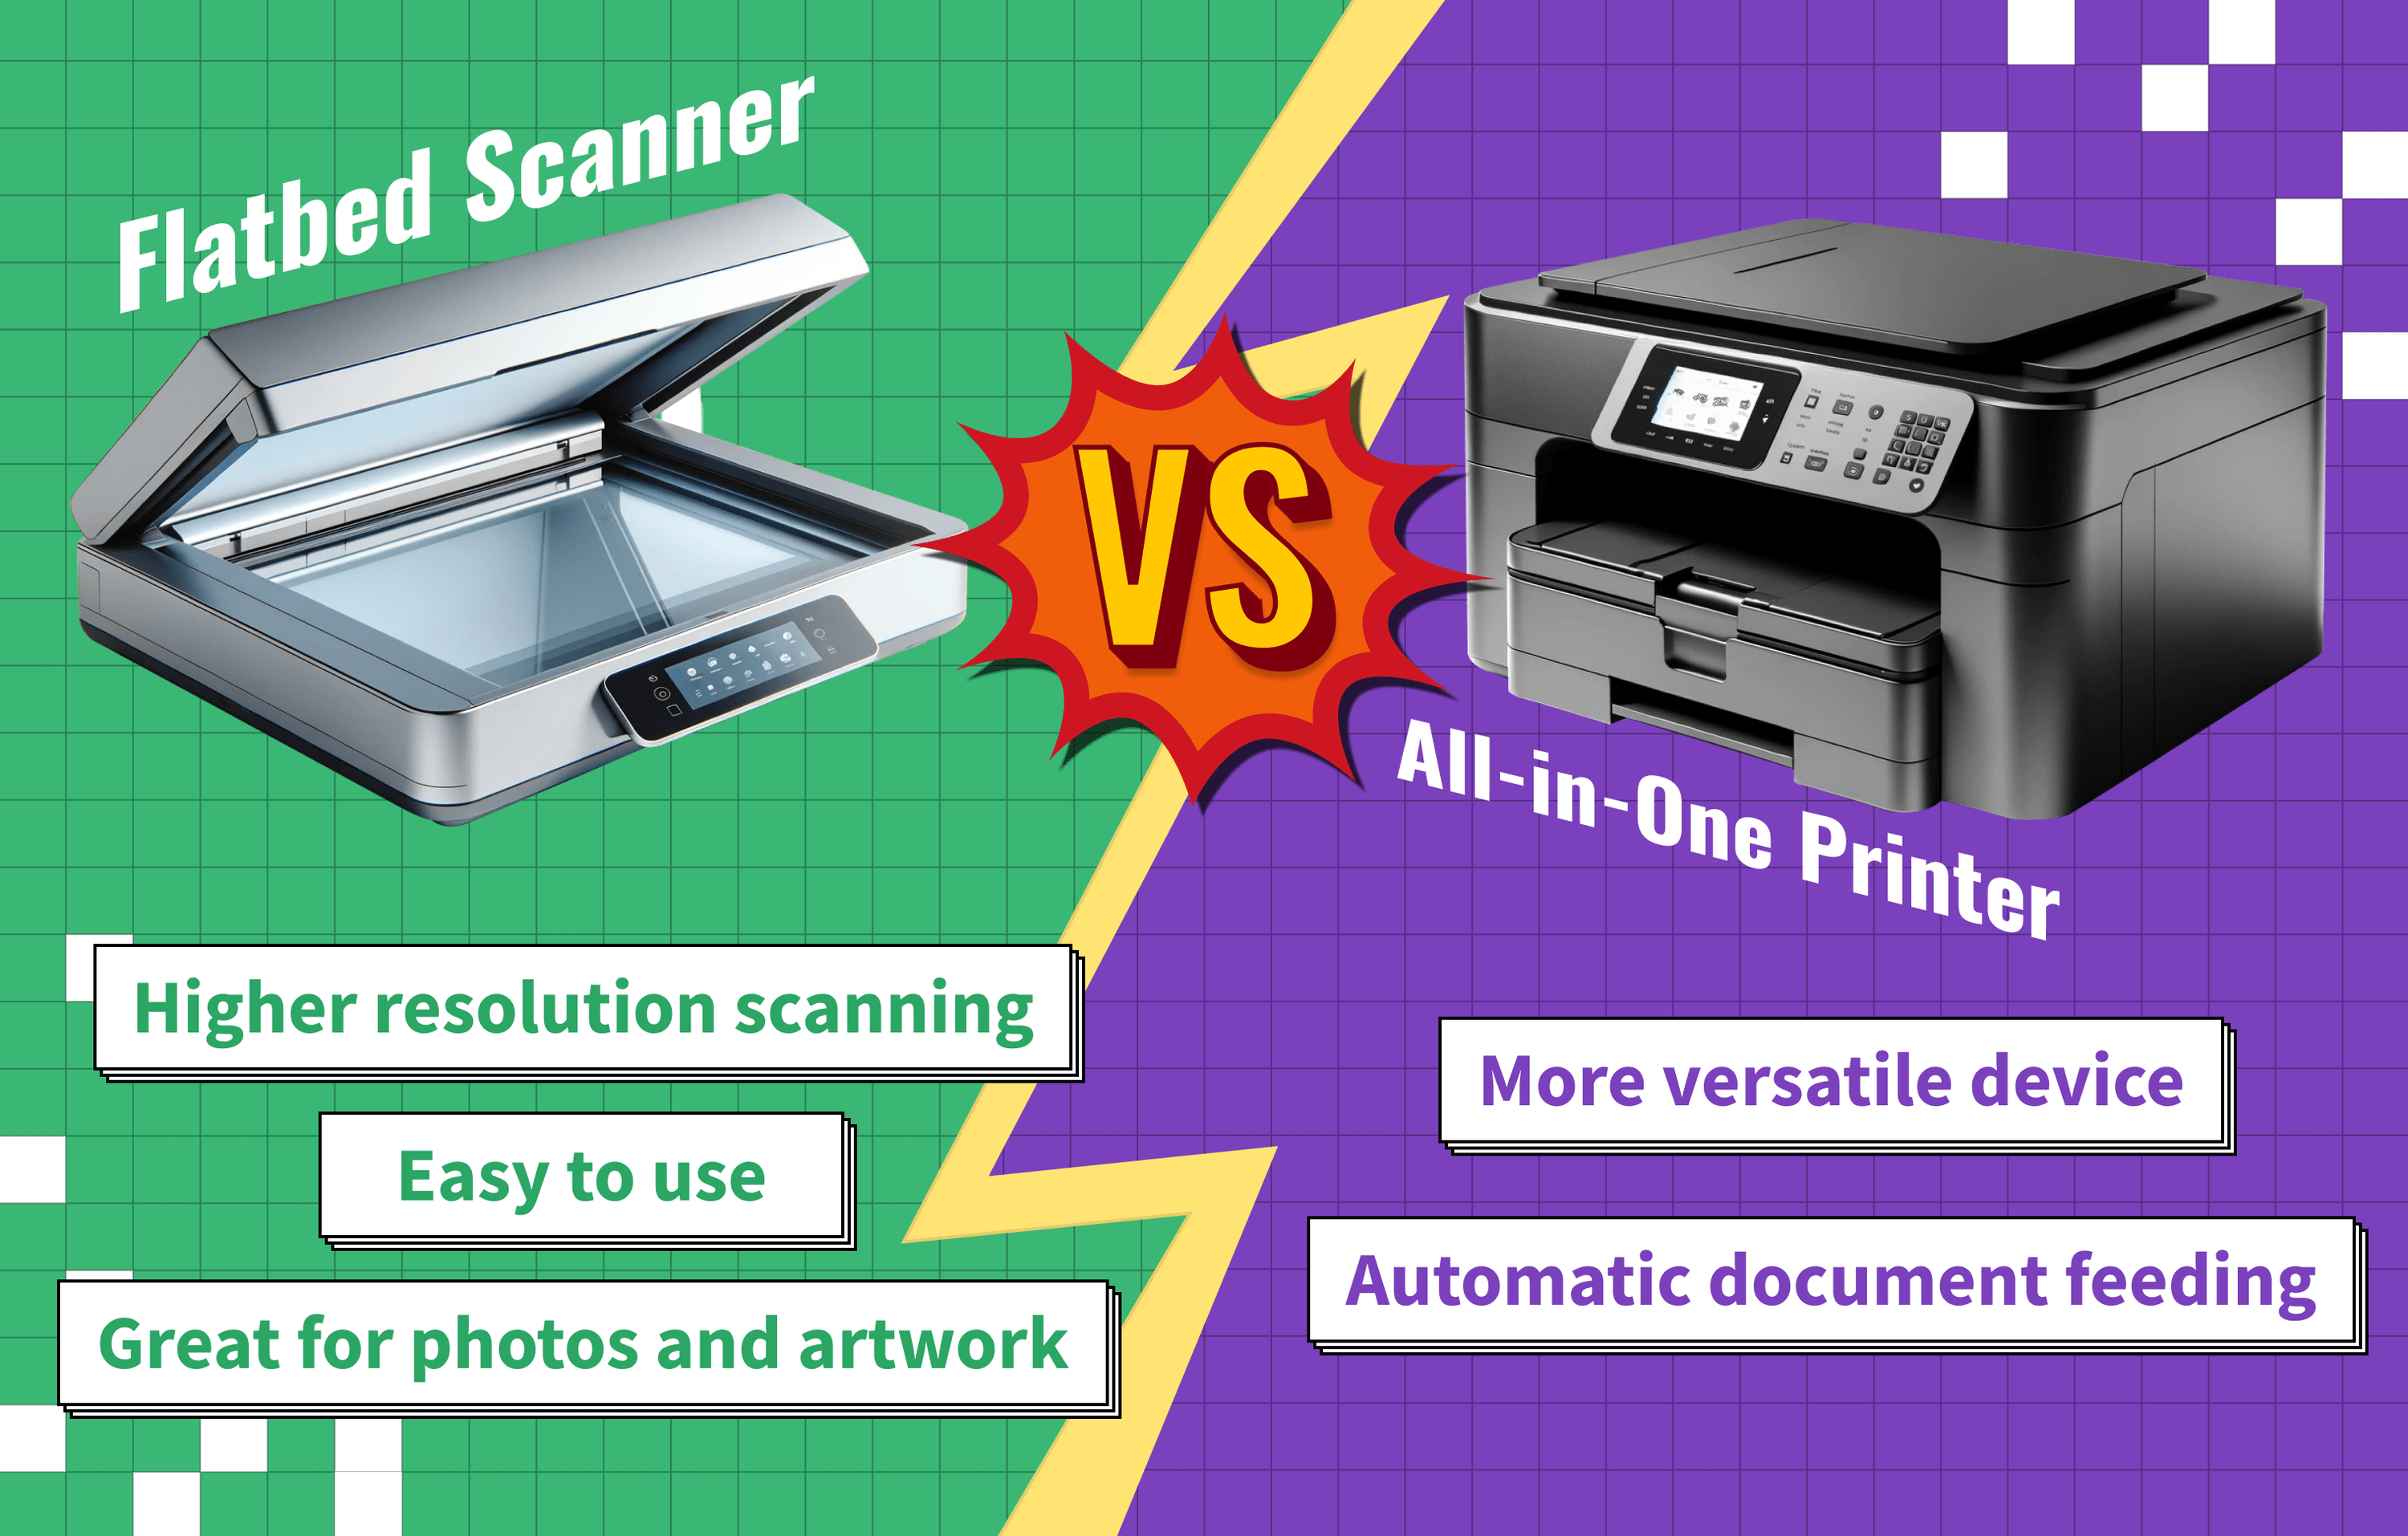 Flatbed Scanner Vs All-in-One Printer